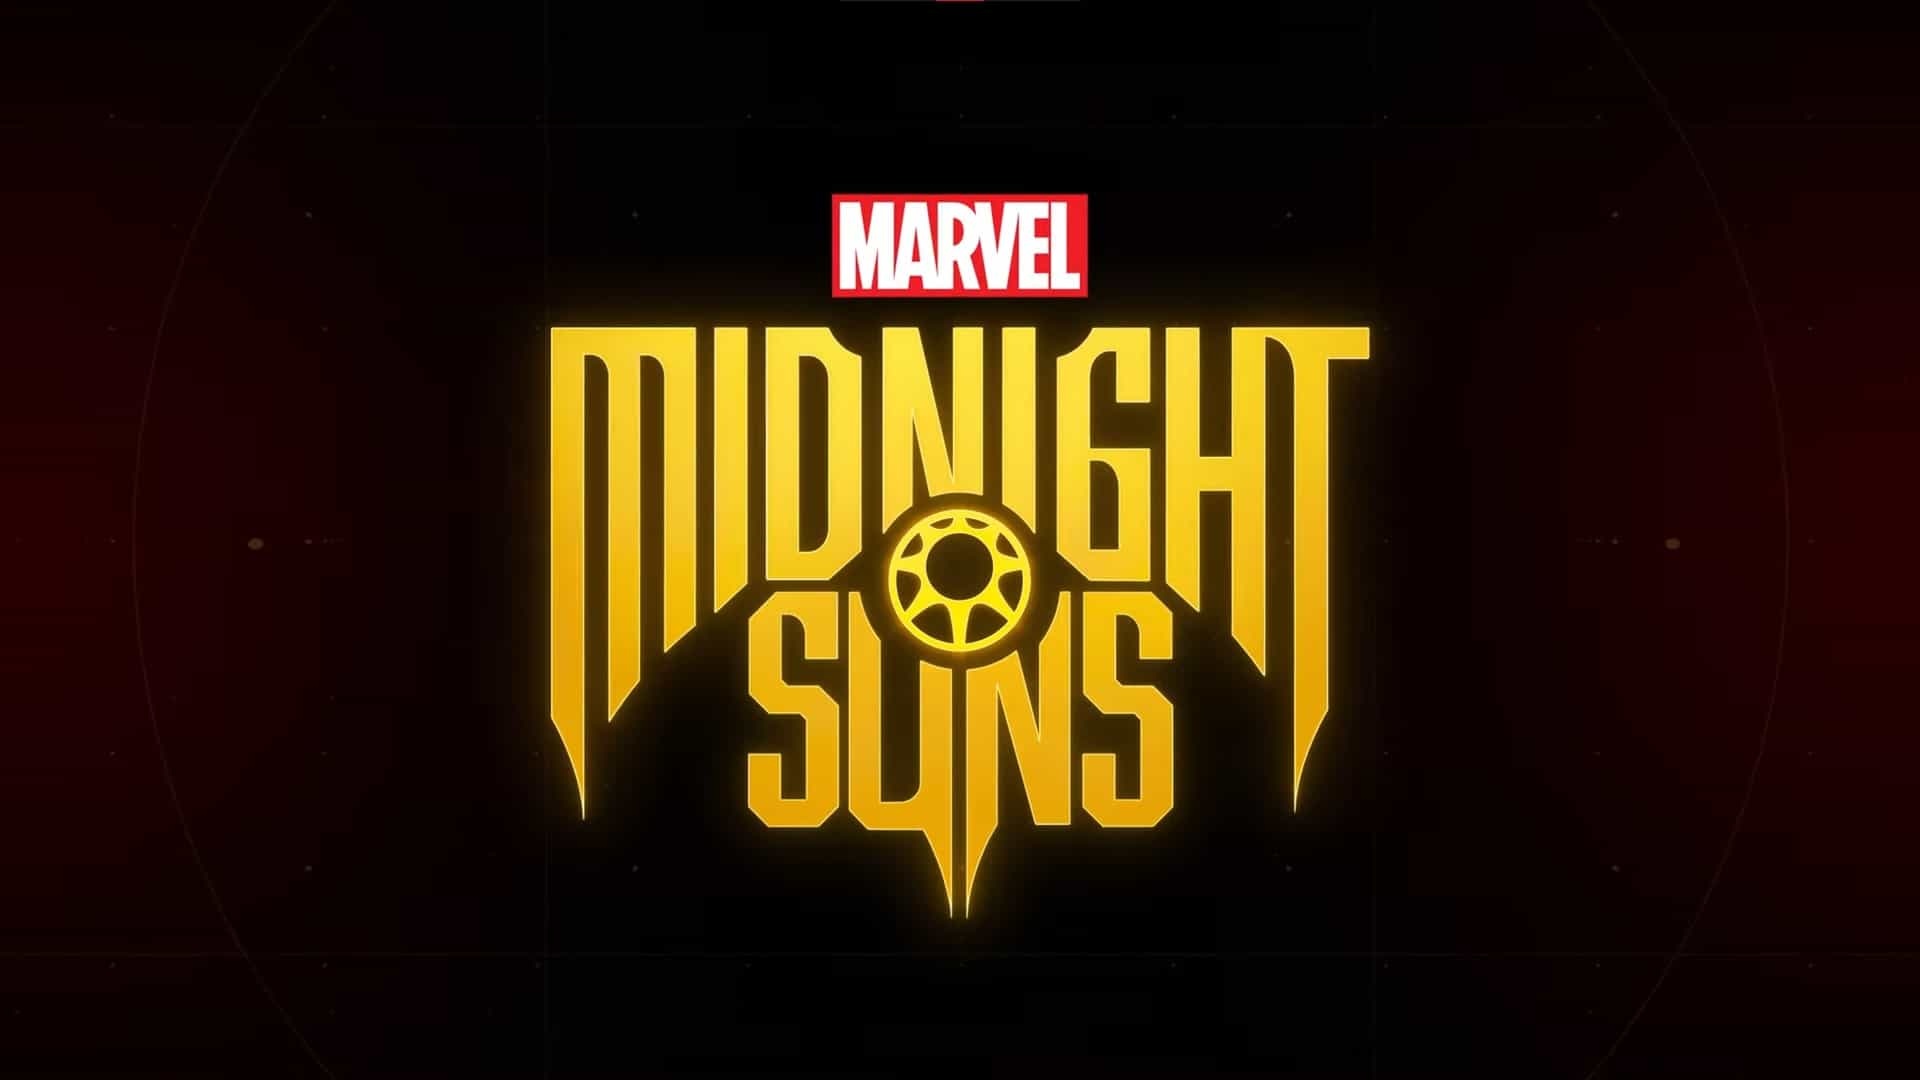 Marvel's Midnight Suns, Tactical RPG, Launching 2022, Firaxis game, 1920x1080 Full HD Desktop